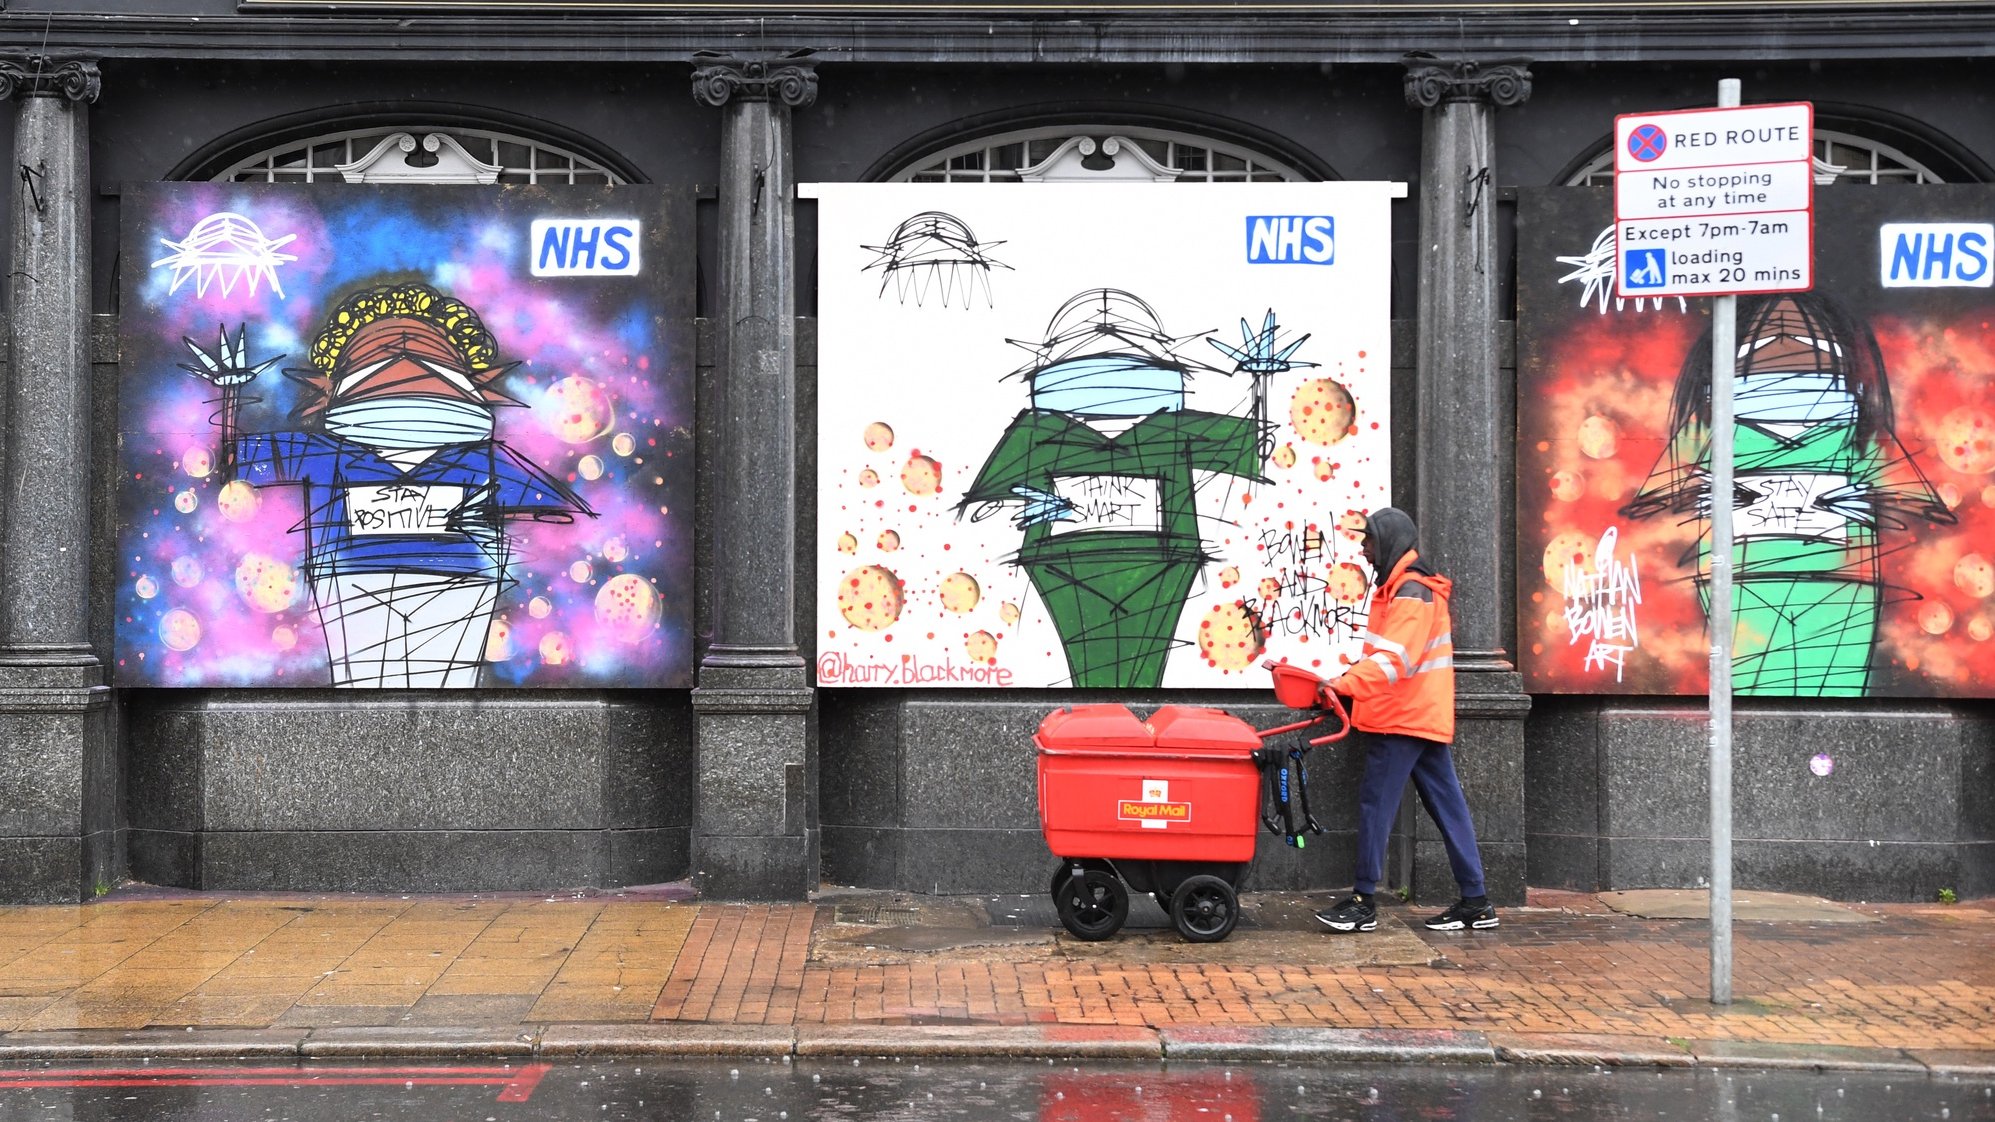 epa08389002 A Royal Mail worker walks past artwork in support of the NHS (National Health service) in London, Britain, 28 April 2020. A minute of silence was held nationally to mark the 84 health workers, including 69 NHS workers and 15 care workers who have had died due to the coronavirus.  EPA/FACUNDO ARRIZABALAGA